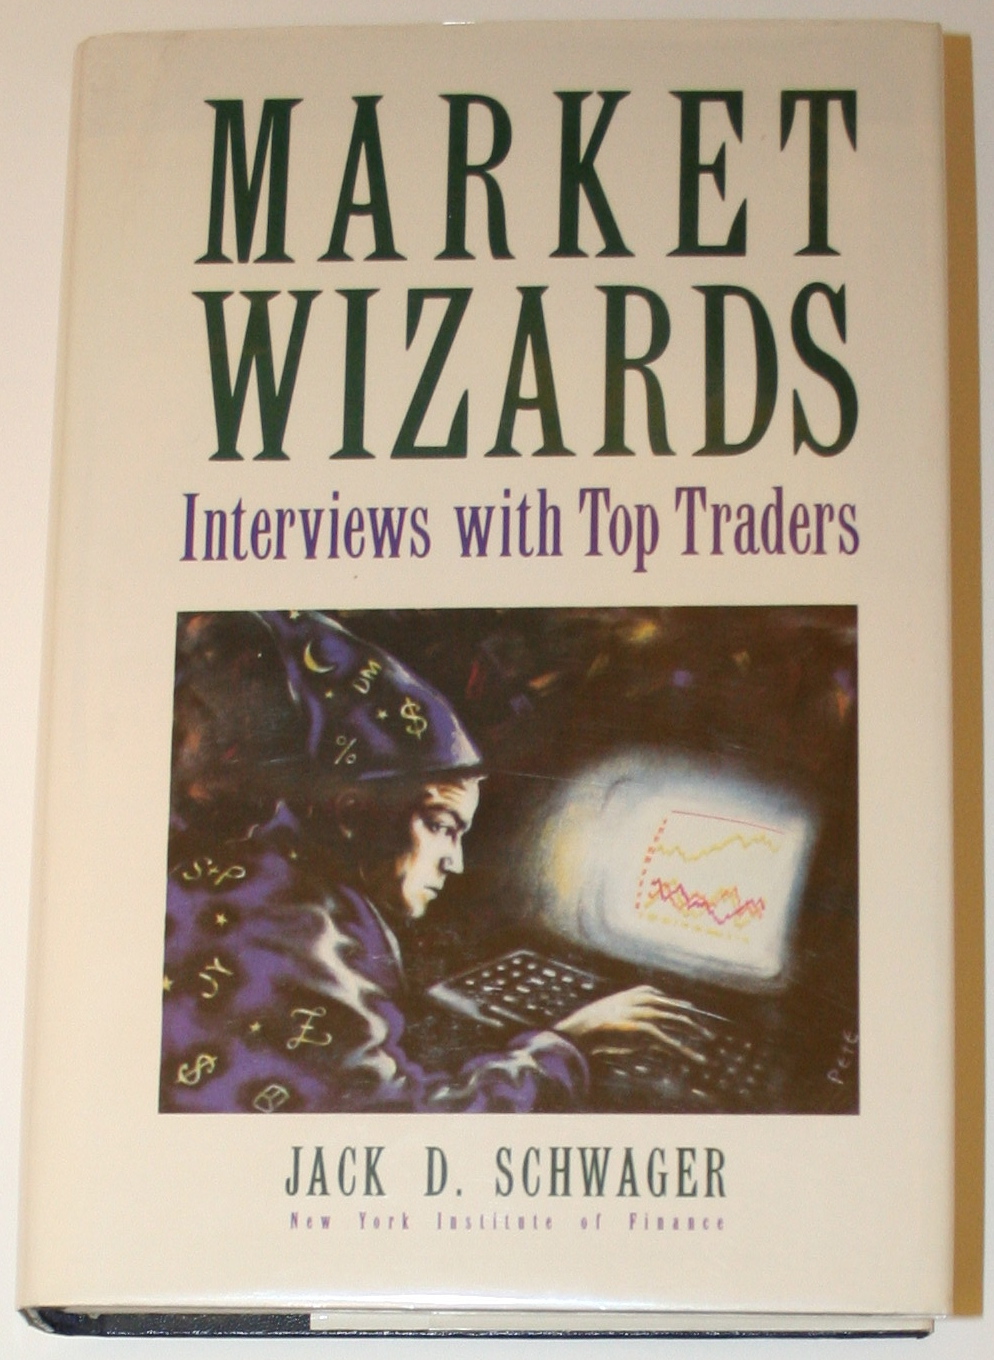 Rare and Out-of-Print Trading and Financial Books: September 2012